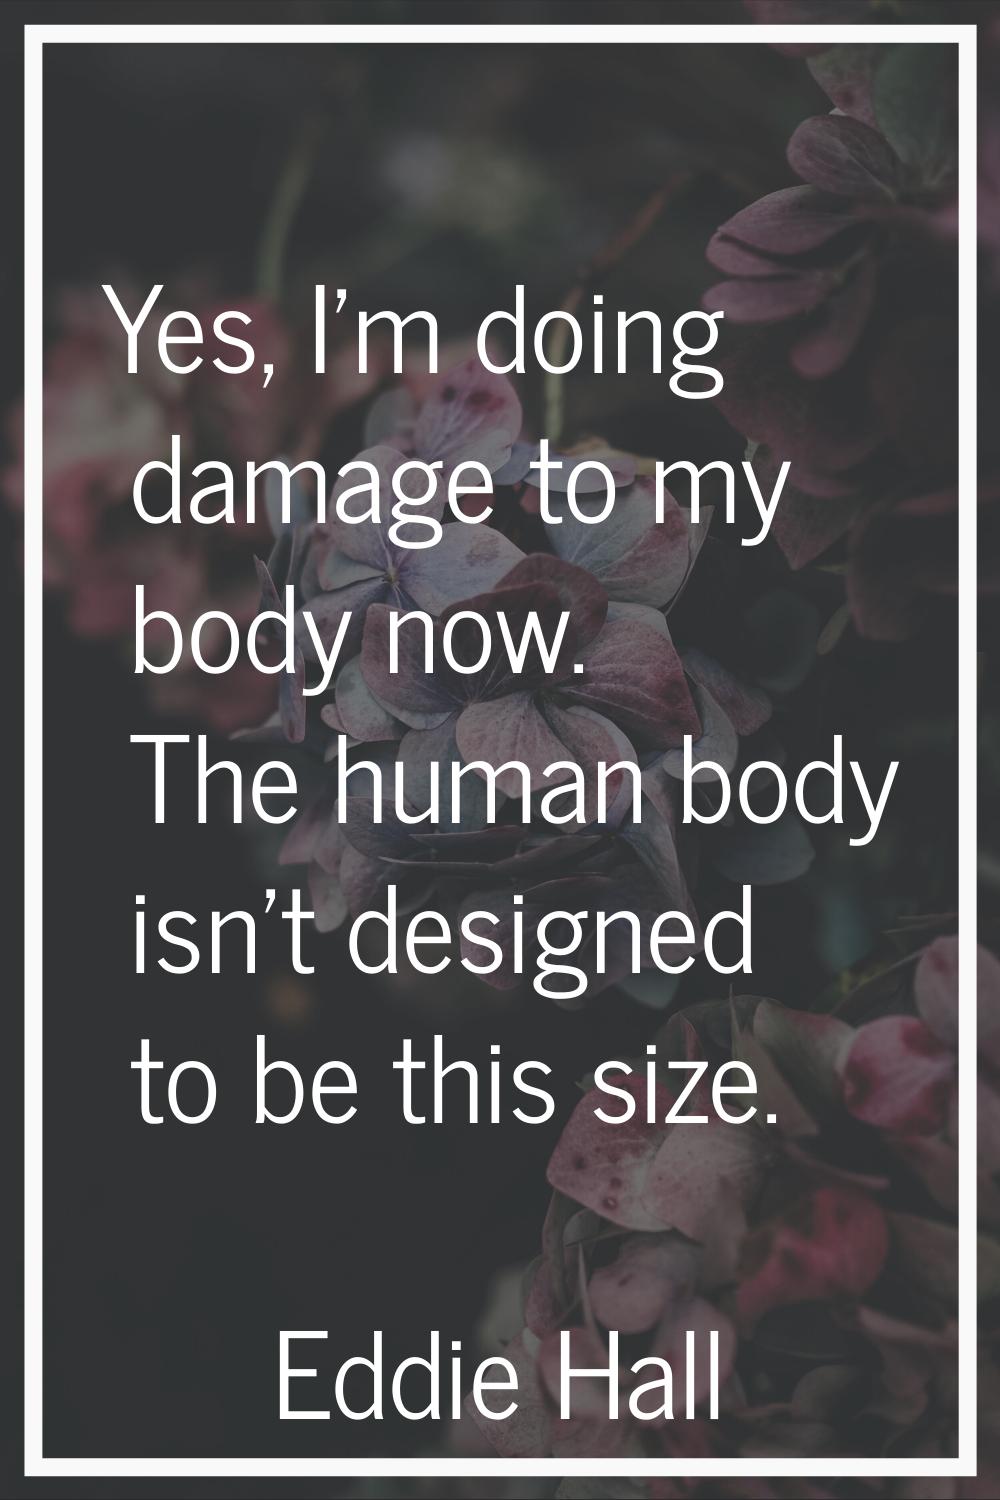 Yes, I'm doing damage to my body now. The human body isn't designed to be this size.